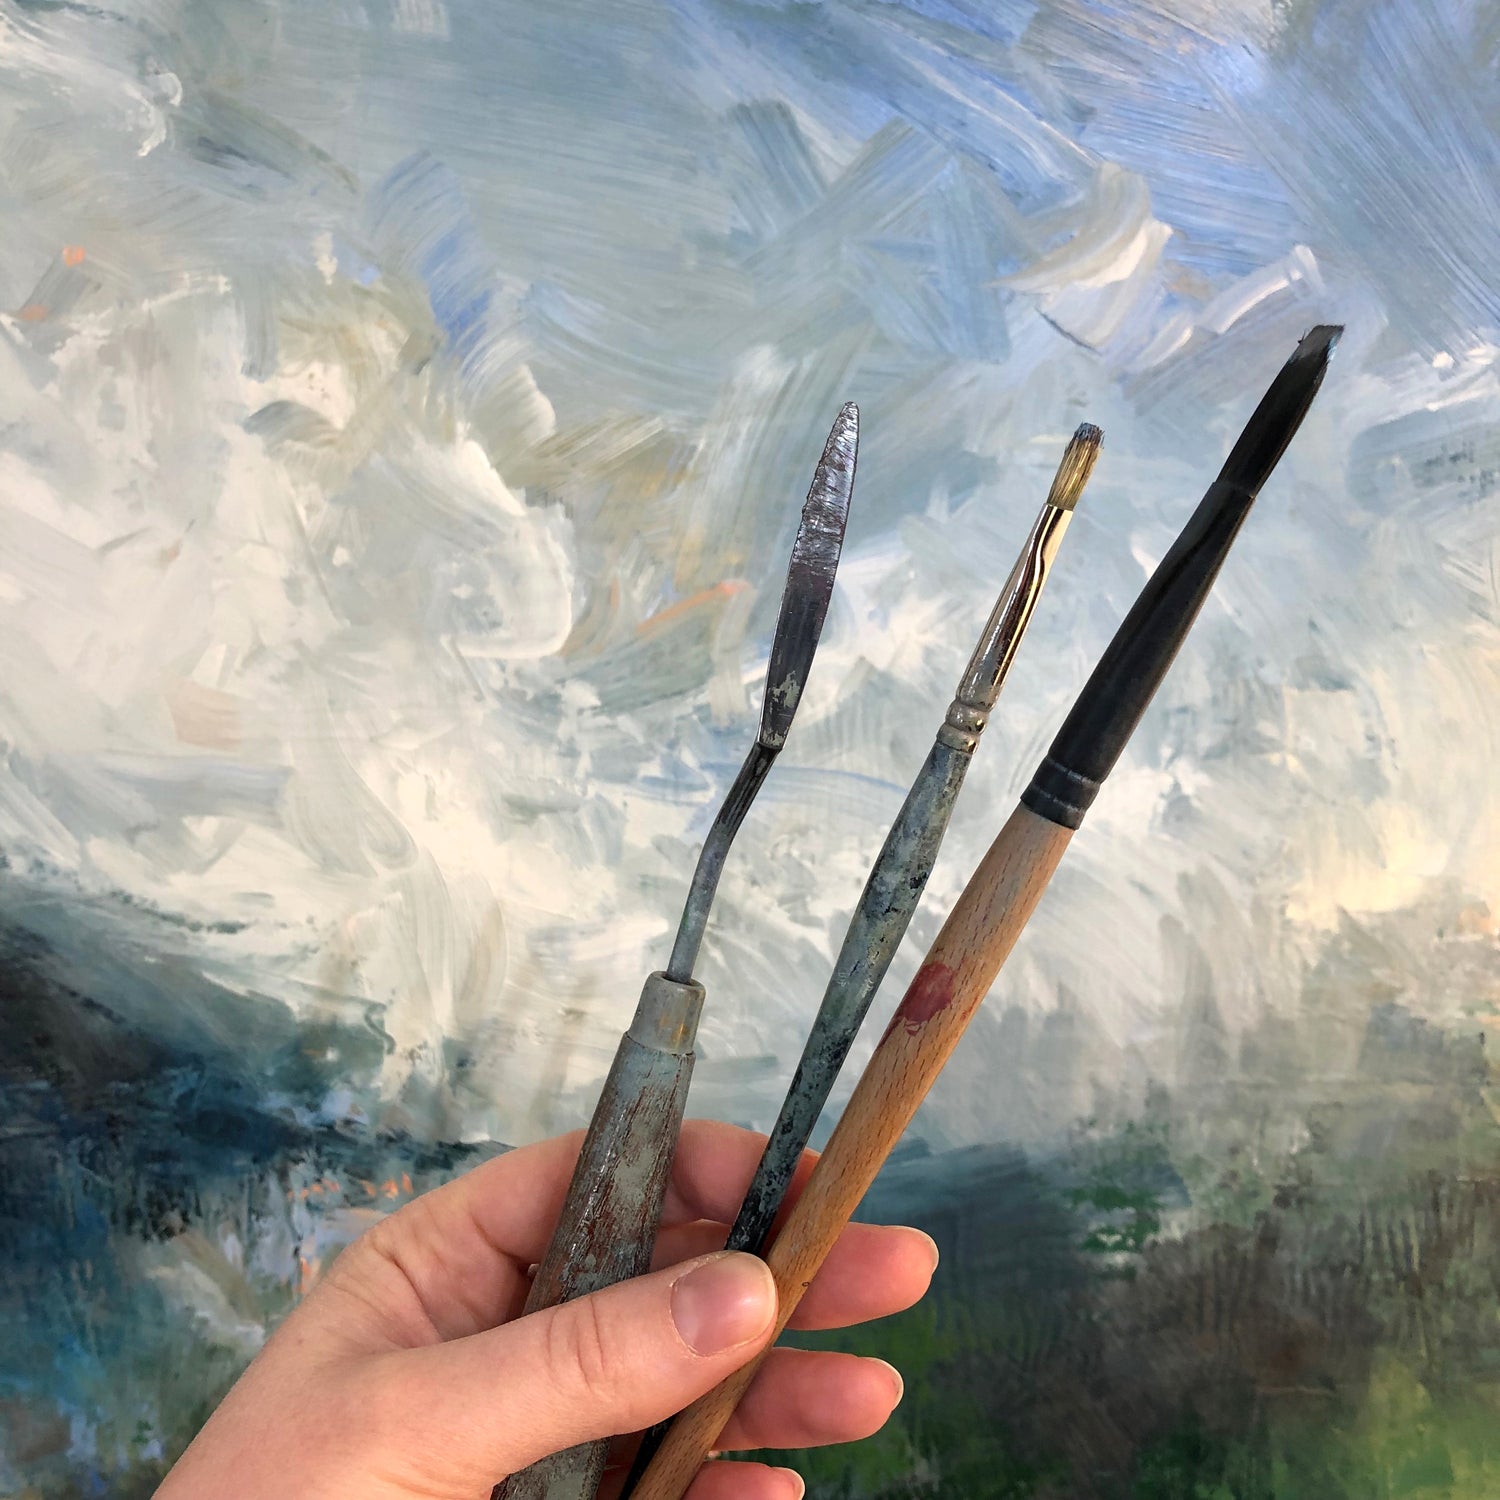 Left hand holding paintbrushes in front of painting